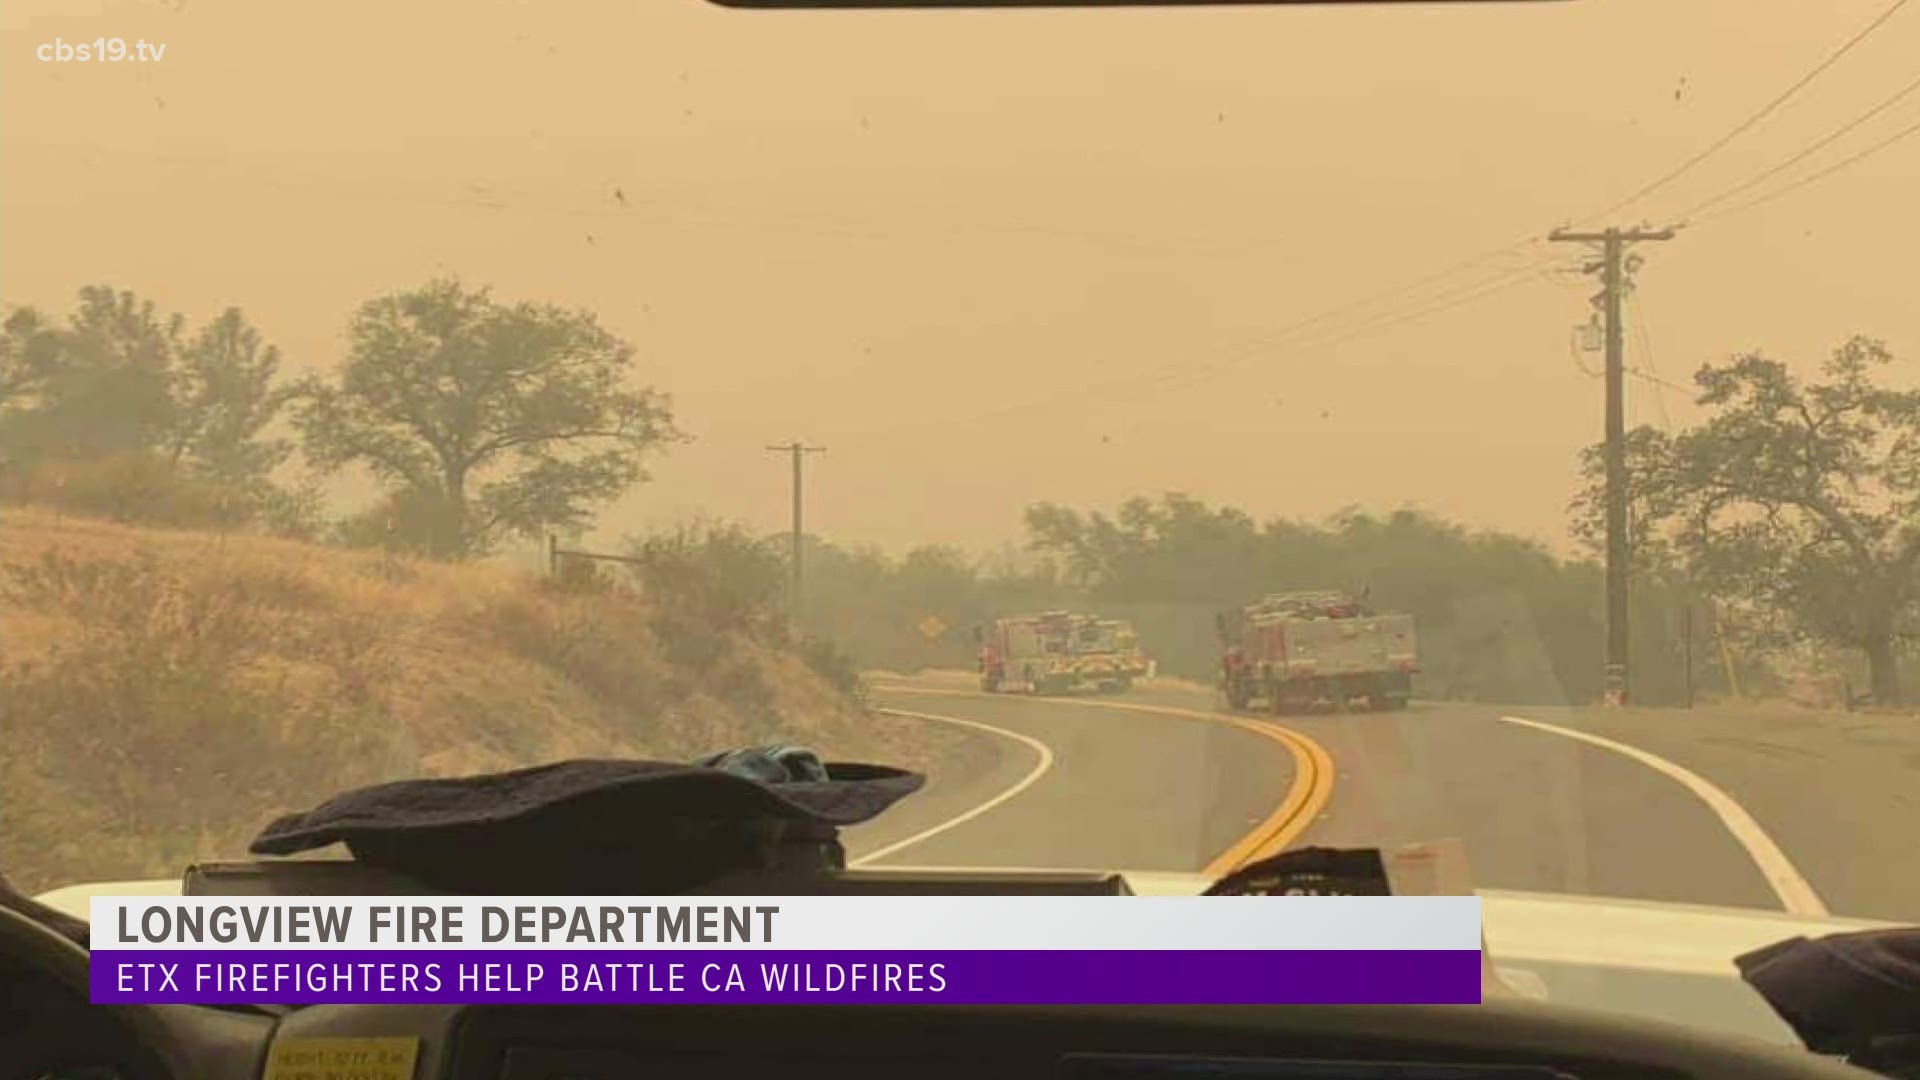 Members of the Longview Fire Department are helping to battle California Wildfires in Fresno.